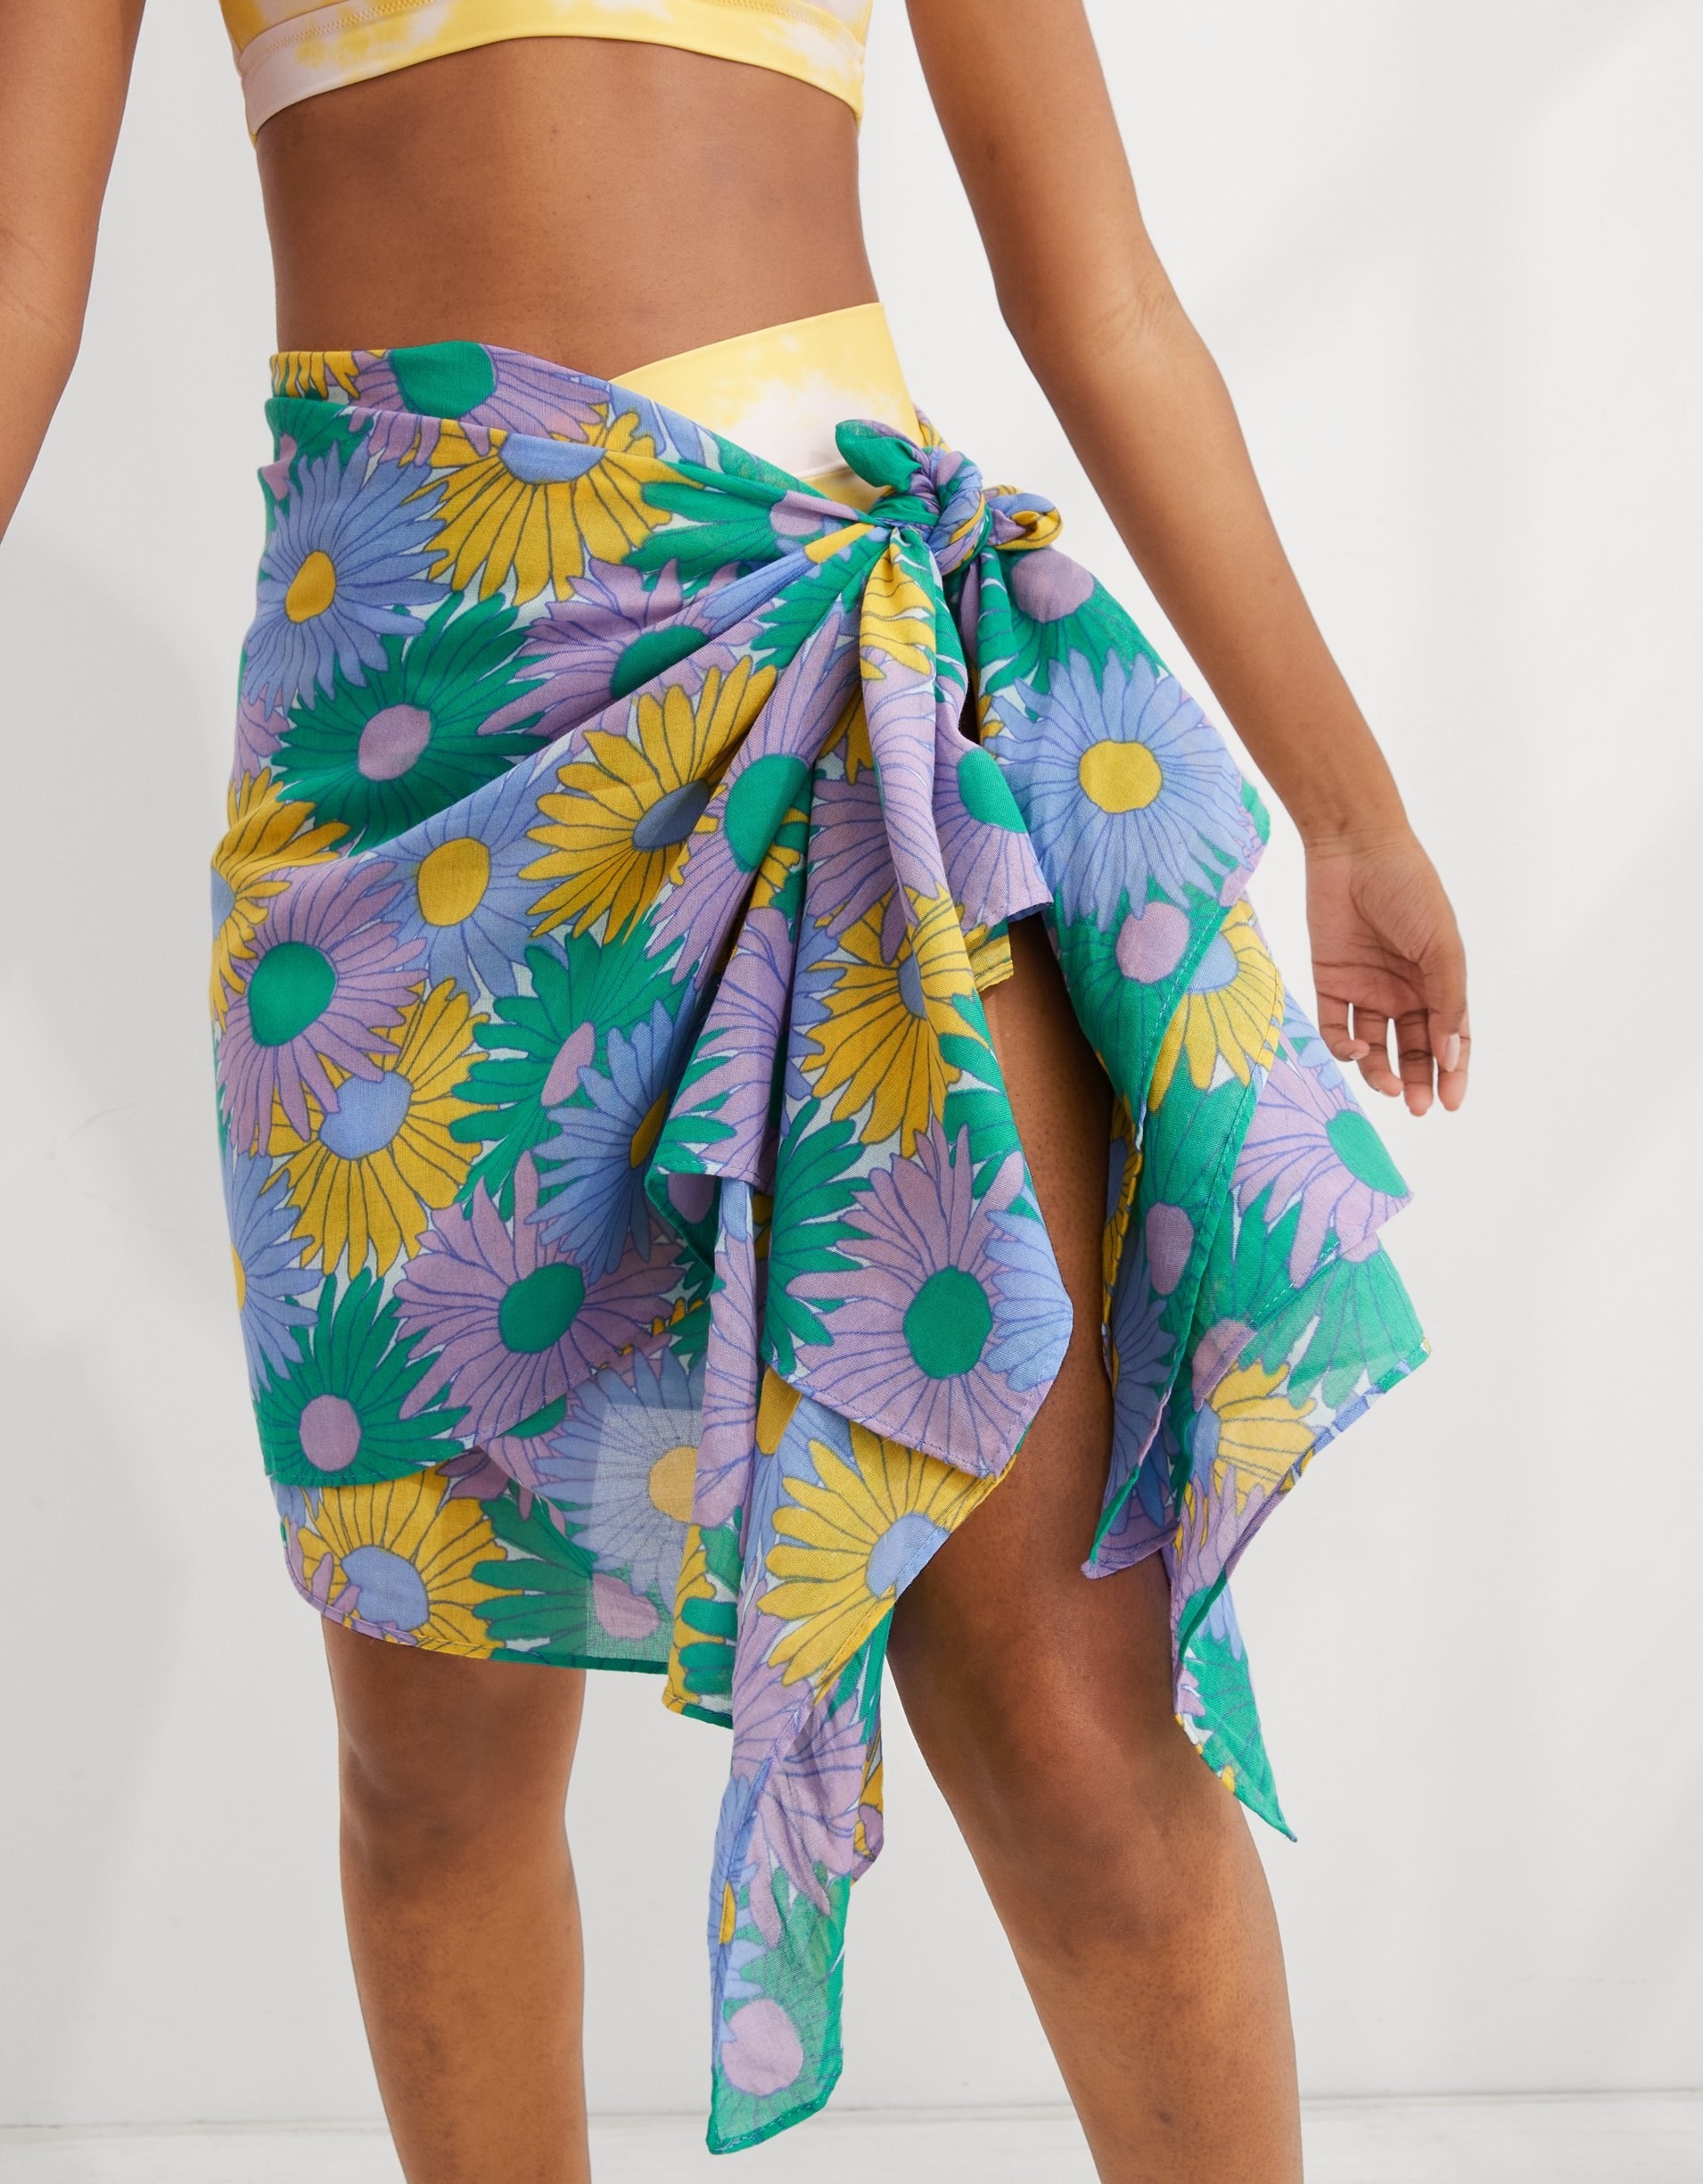 model wearing a lilac, yellow, green, and periwinkle sarong over a bikini